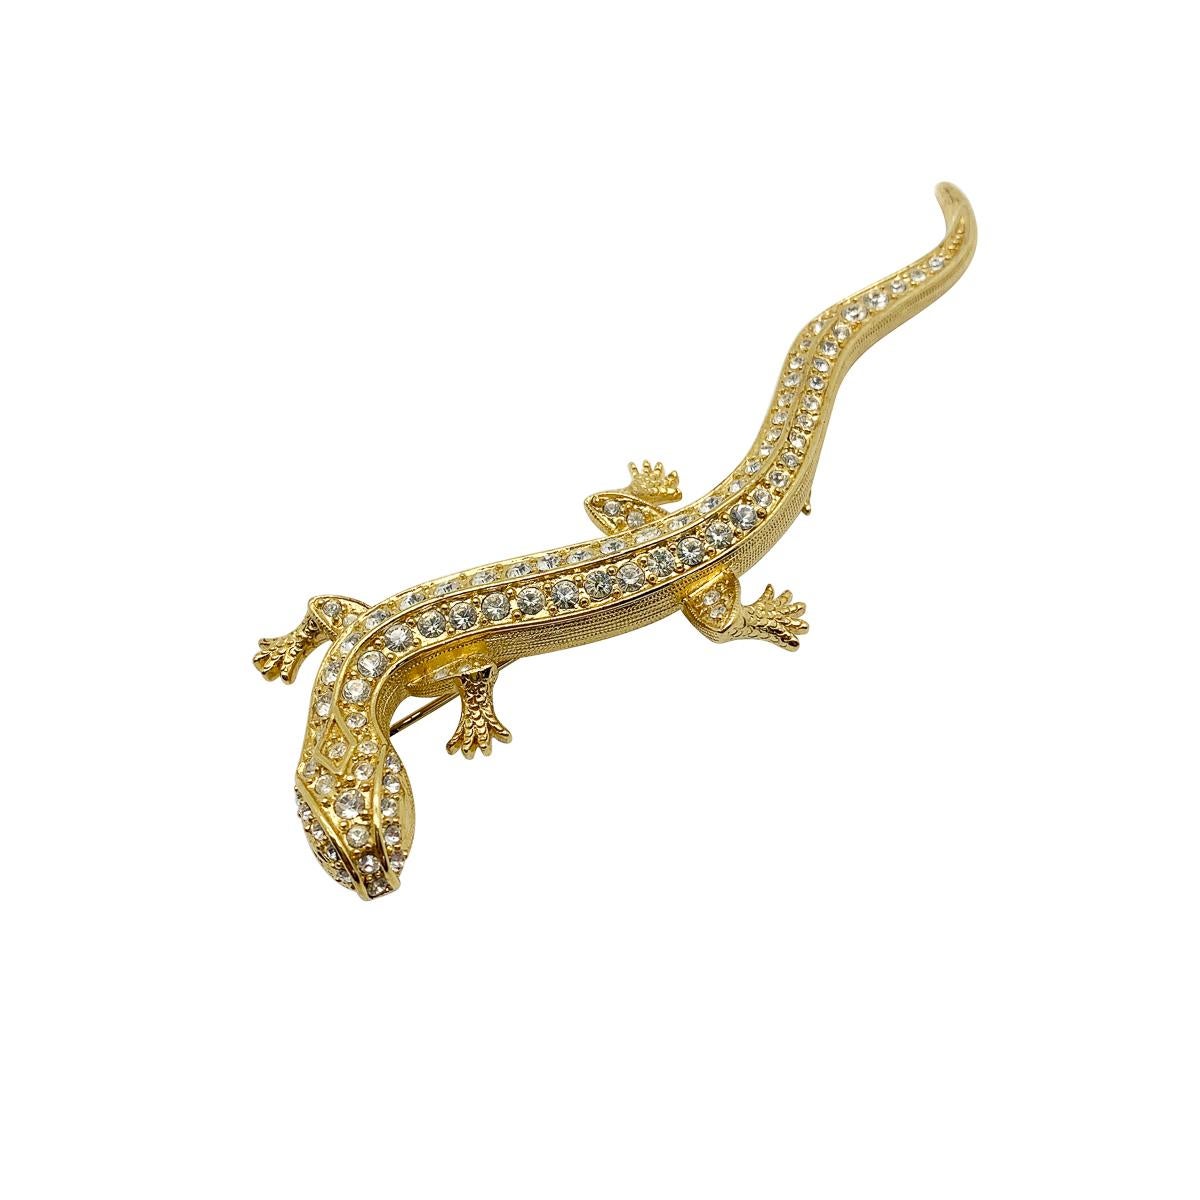 An impressive Vintage Statement Lizard Brooch. Featuring a wonderfully long lizard design set with crystals for a perfect finish. Incredible quality.

Vintage Condition: Very good without damage or noteworthy wear. 
Materials: Gold plated